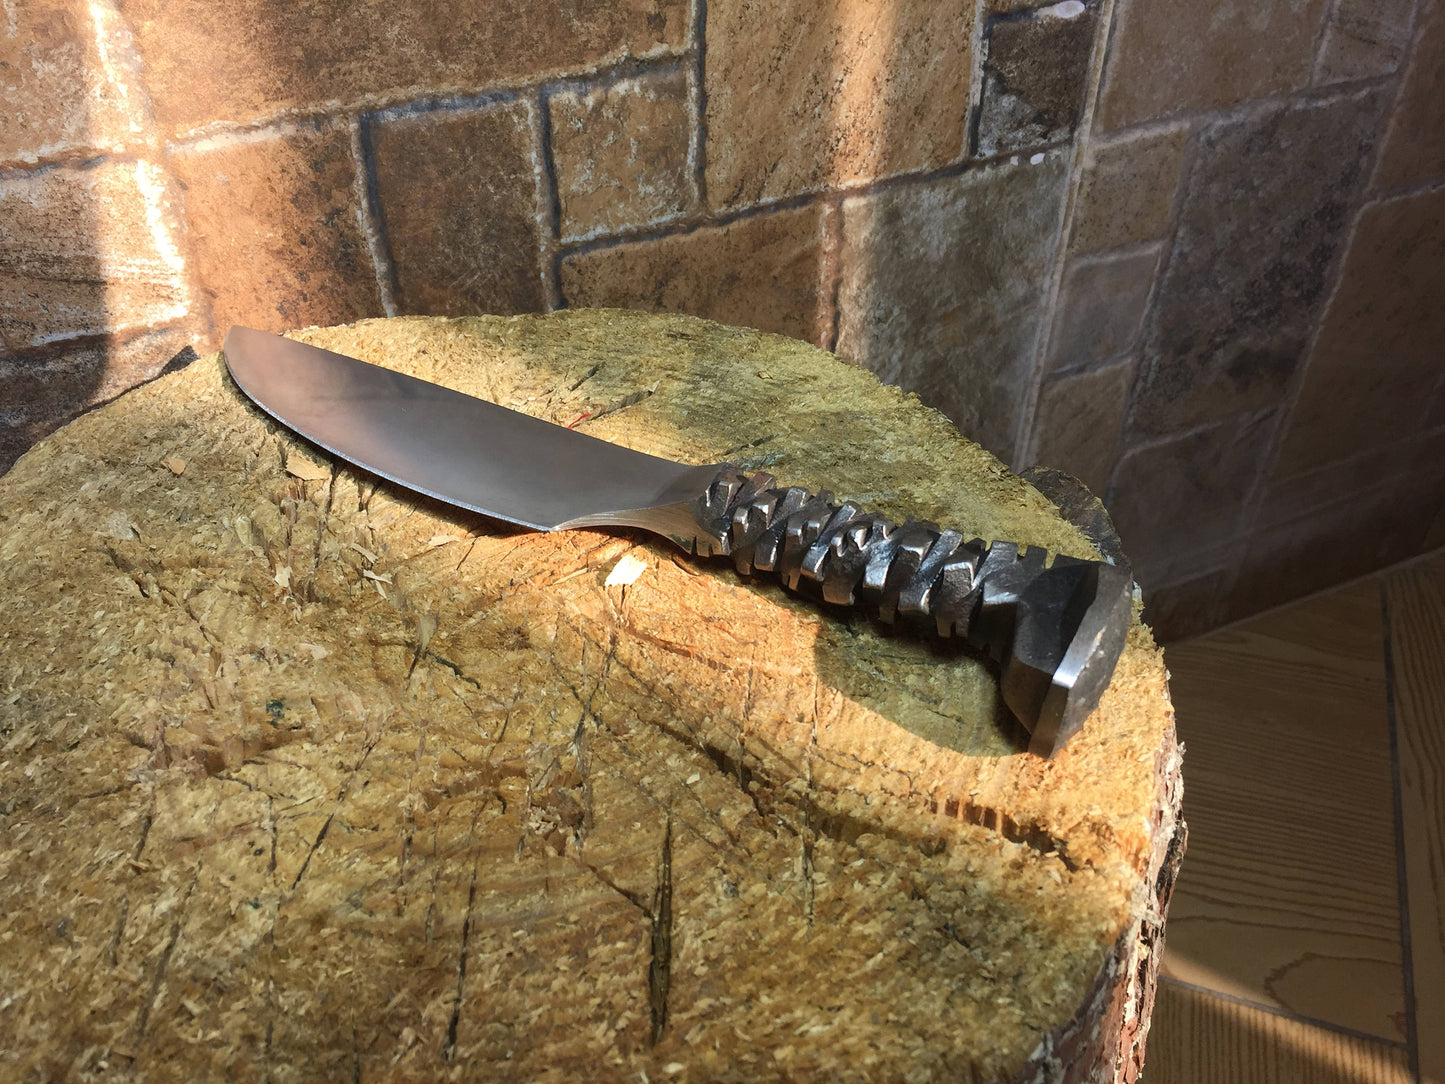 Railroad spike knife, viking knife, iron gifts, manly gifts, mens gifts, wedding anniversary gift, 6th anniversary gift for him, 6 year